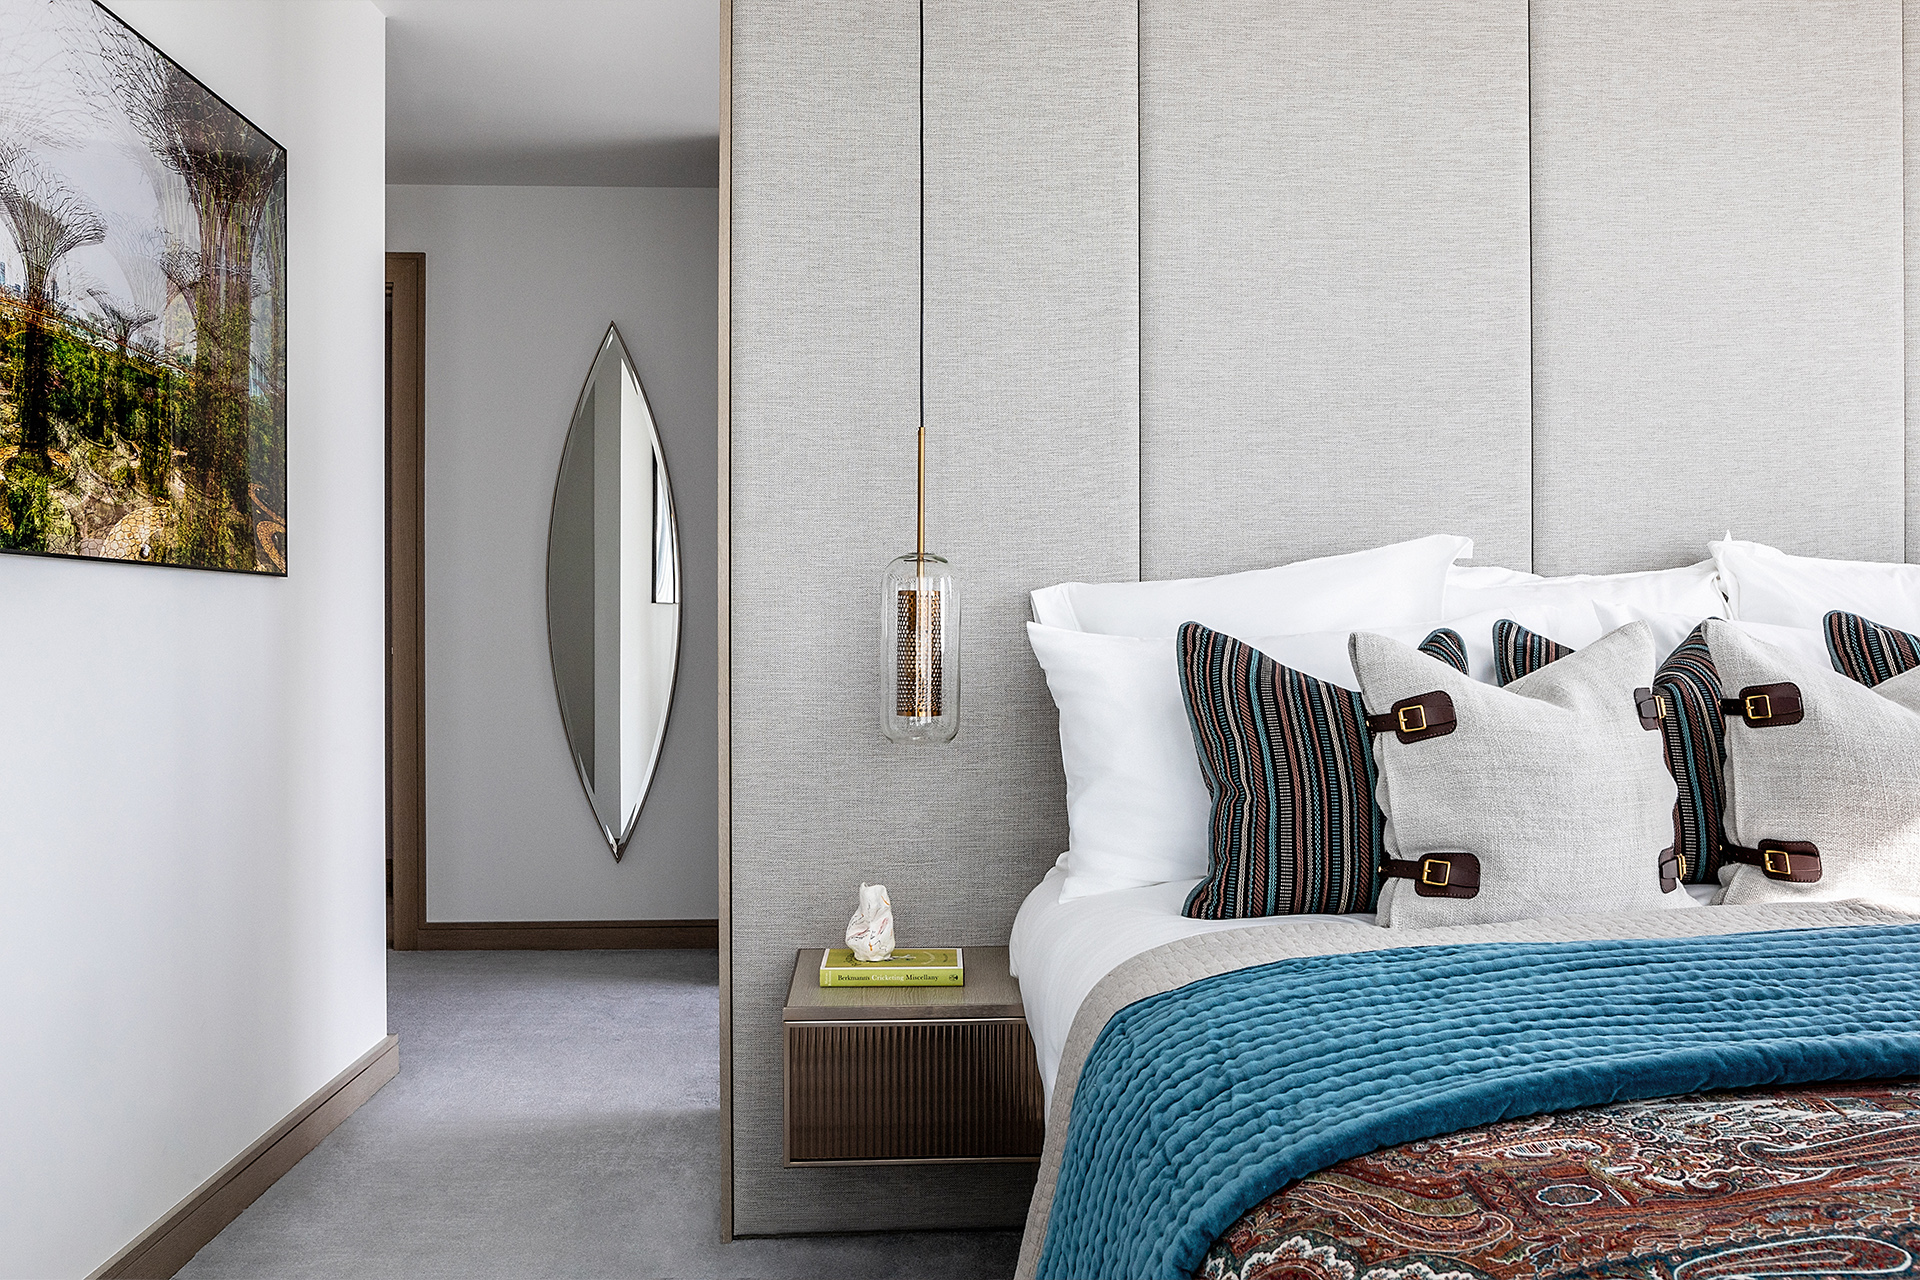 One St. John's Wood | Comfortable bedding and curved mirror on the wall | Angel O'Donnell